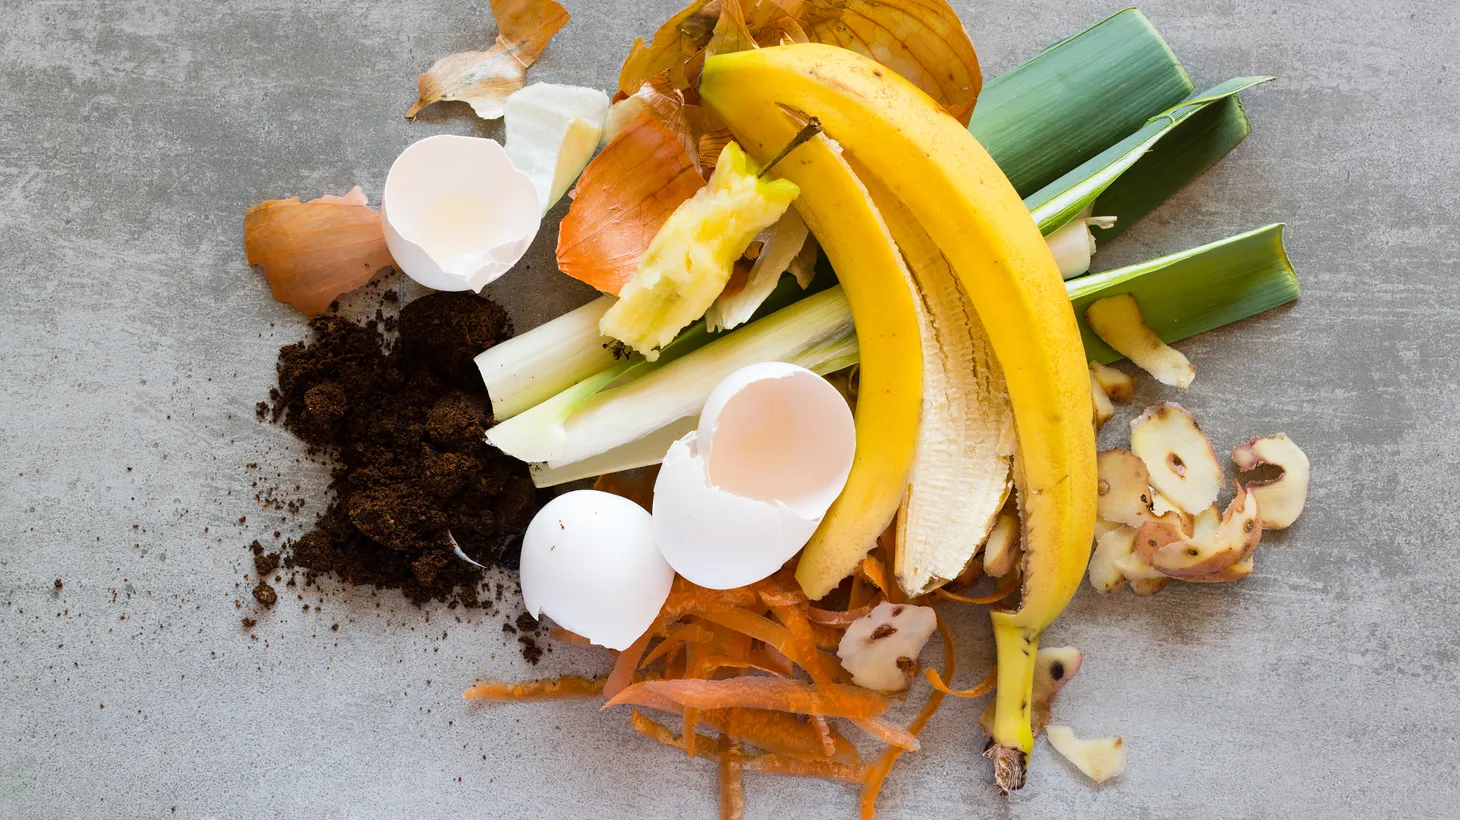 A new law requires Californians to recycle their food scraps and other leftovers. While many cities and municipalities are still deciding how to apply the new regulations, the City of Santa Monica is mandating residents to use the green bin to recycle all fruit and vegetable scraps, along with egg shells, dairy products, meat, bones, coffee grounds, tea bags, as well as food-soiled papers.